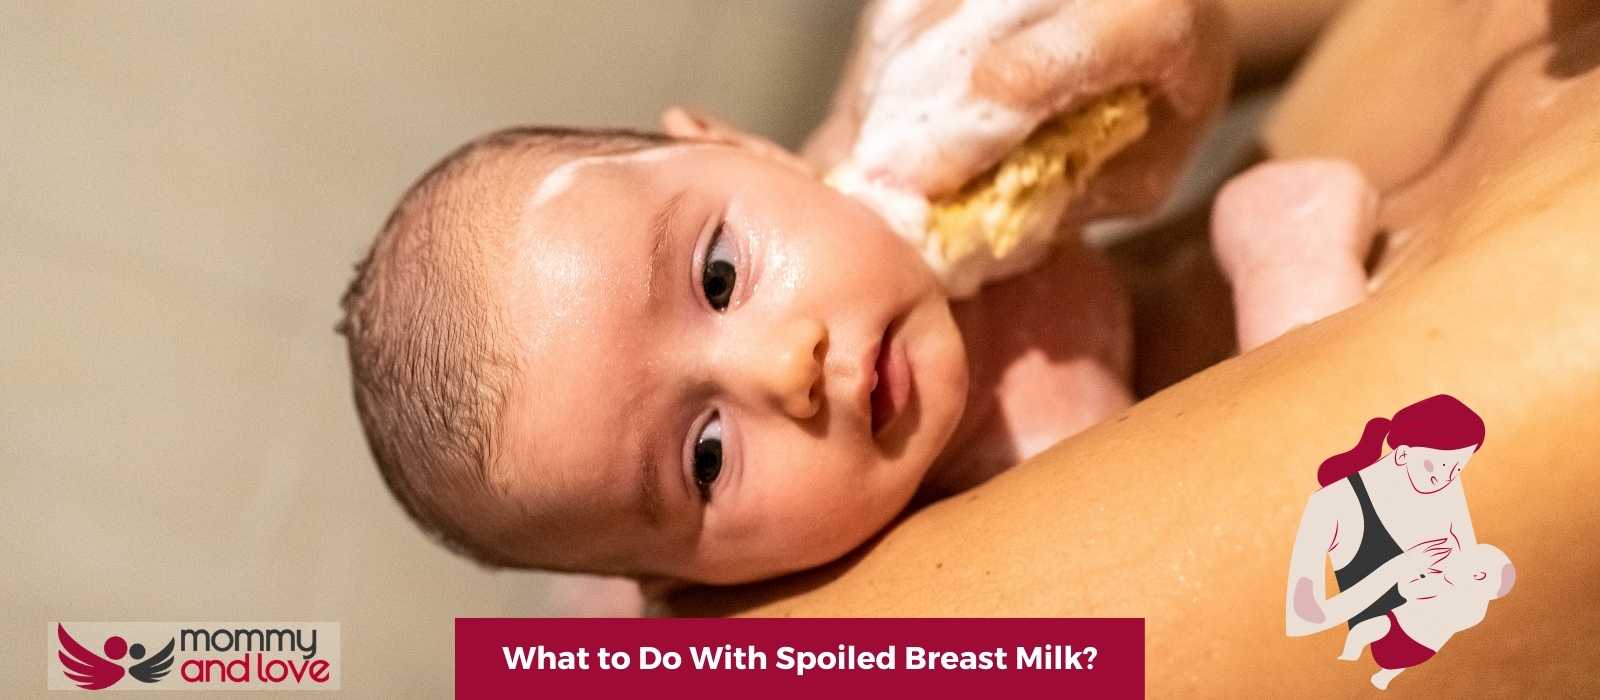 What to Do With Spoiled Breast Milk